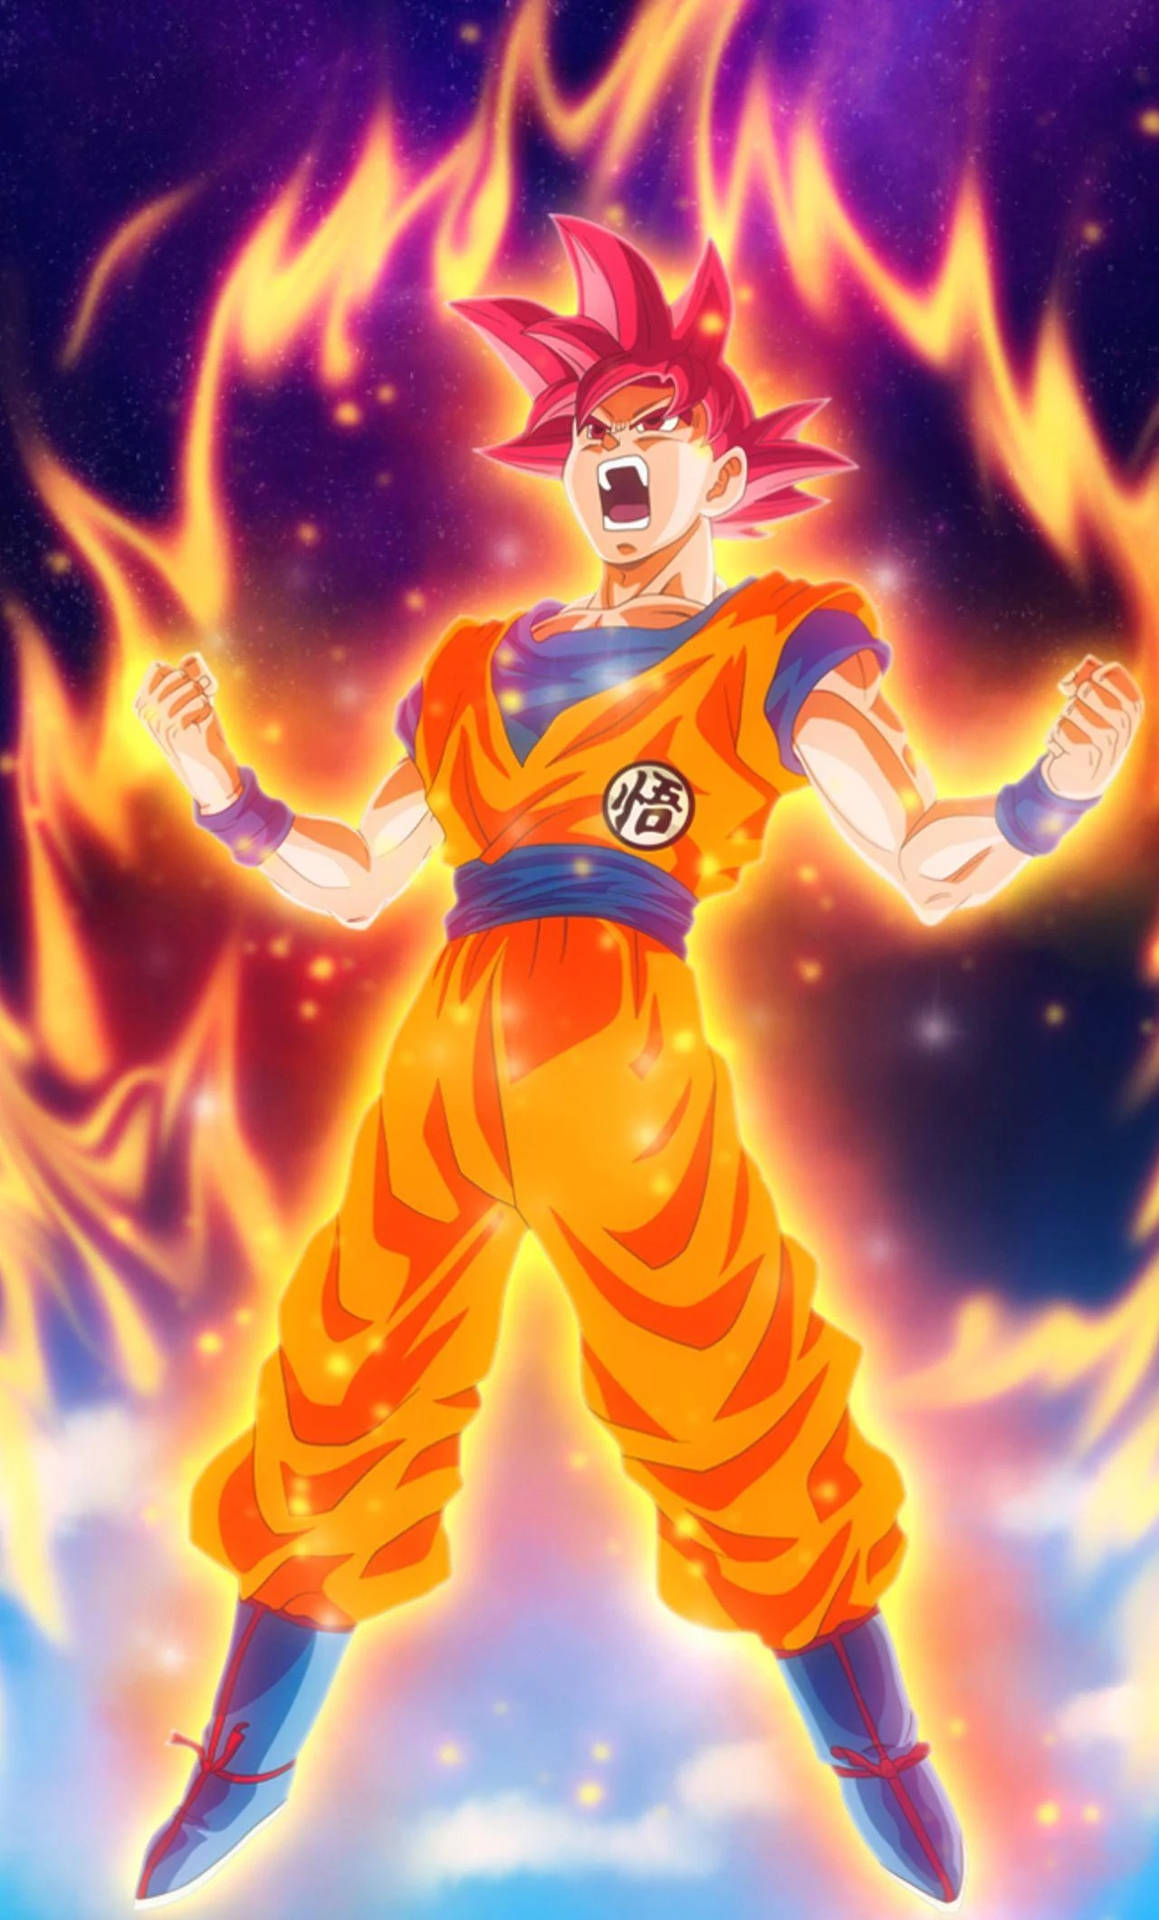 100+] Dragon Ball Z Iphone Wallpapers